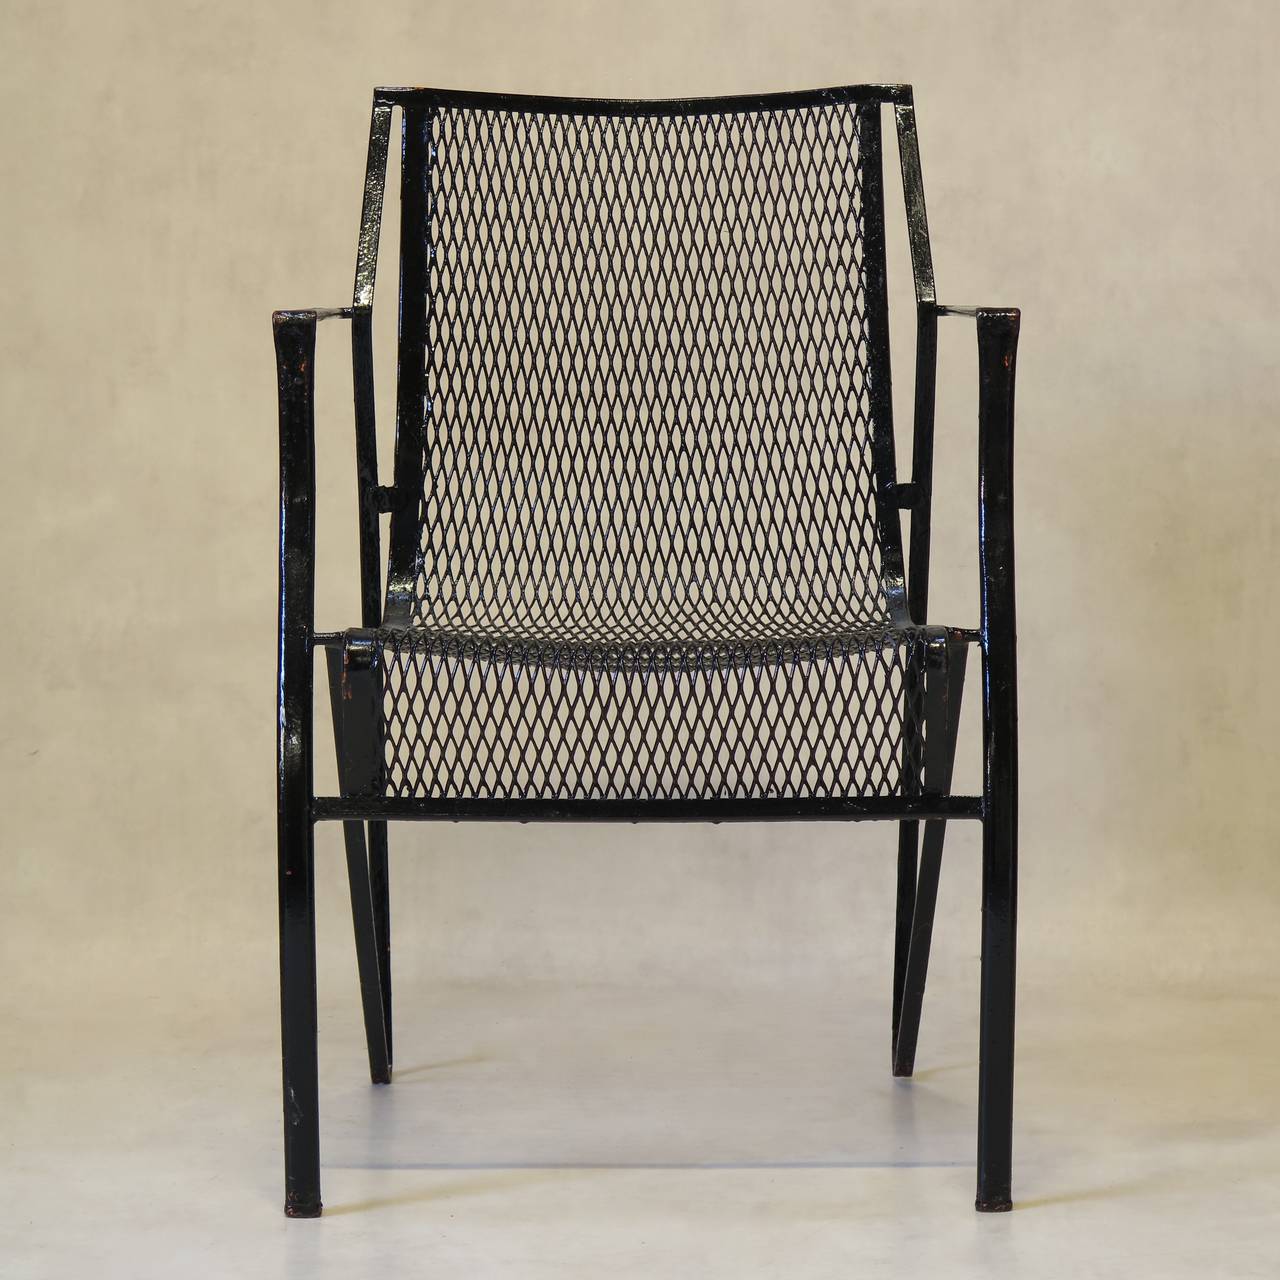 Set of ten armchairs made of iron with a glossy black finish. Nice lines. Traces of reddy-orange primer visible beneath.